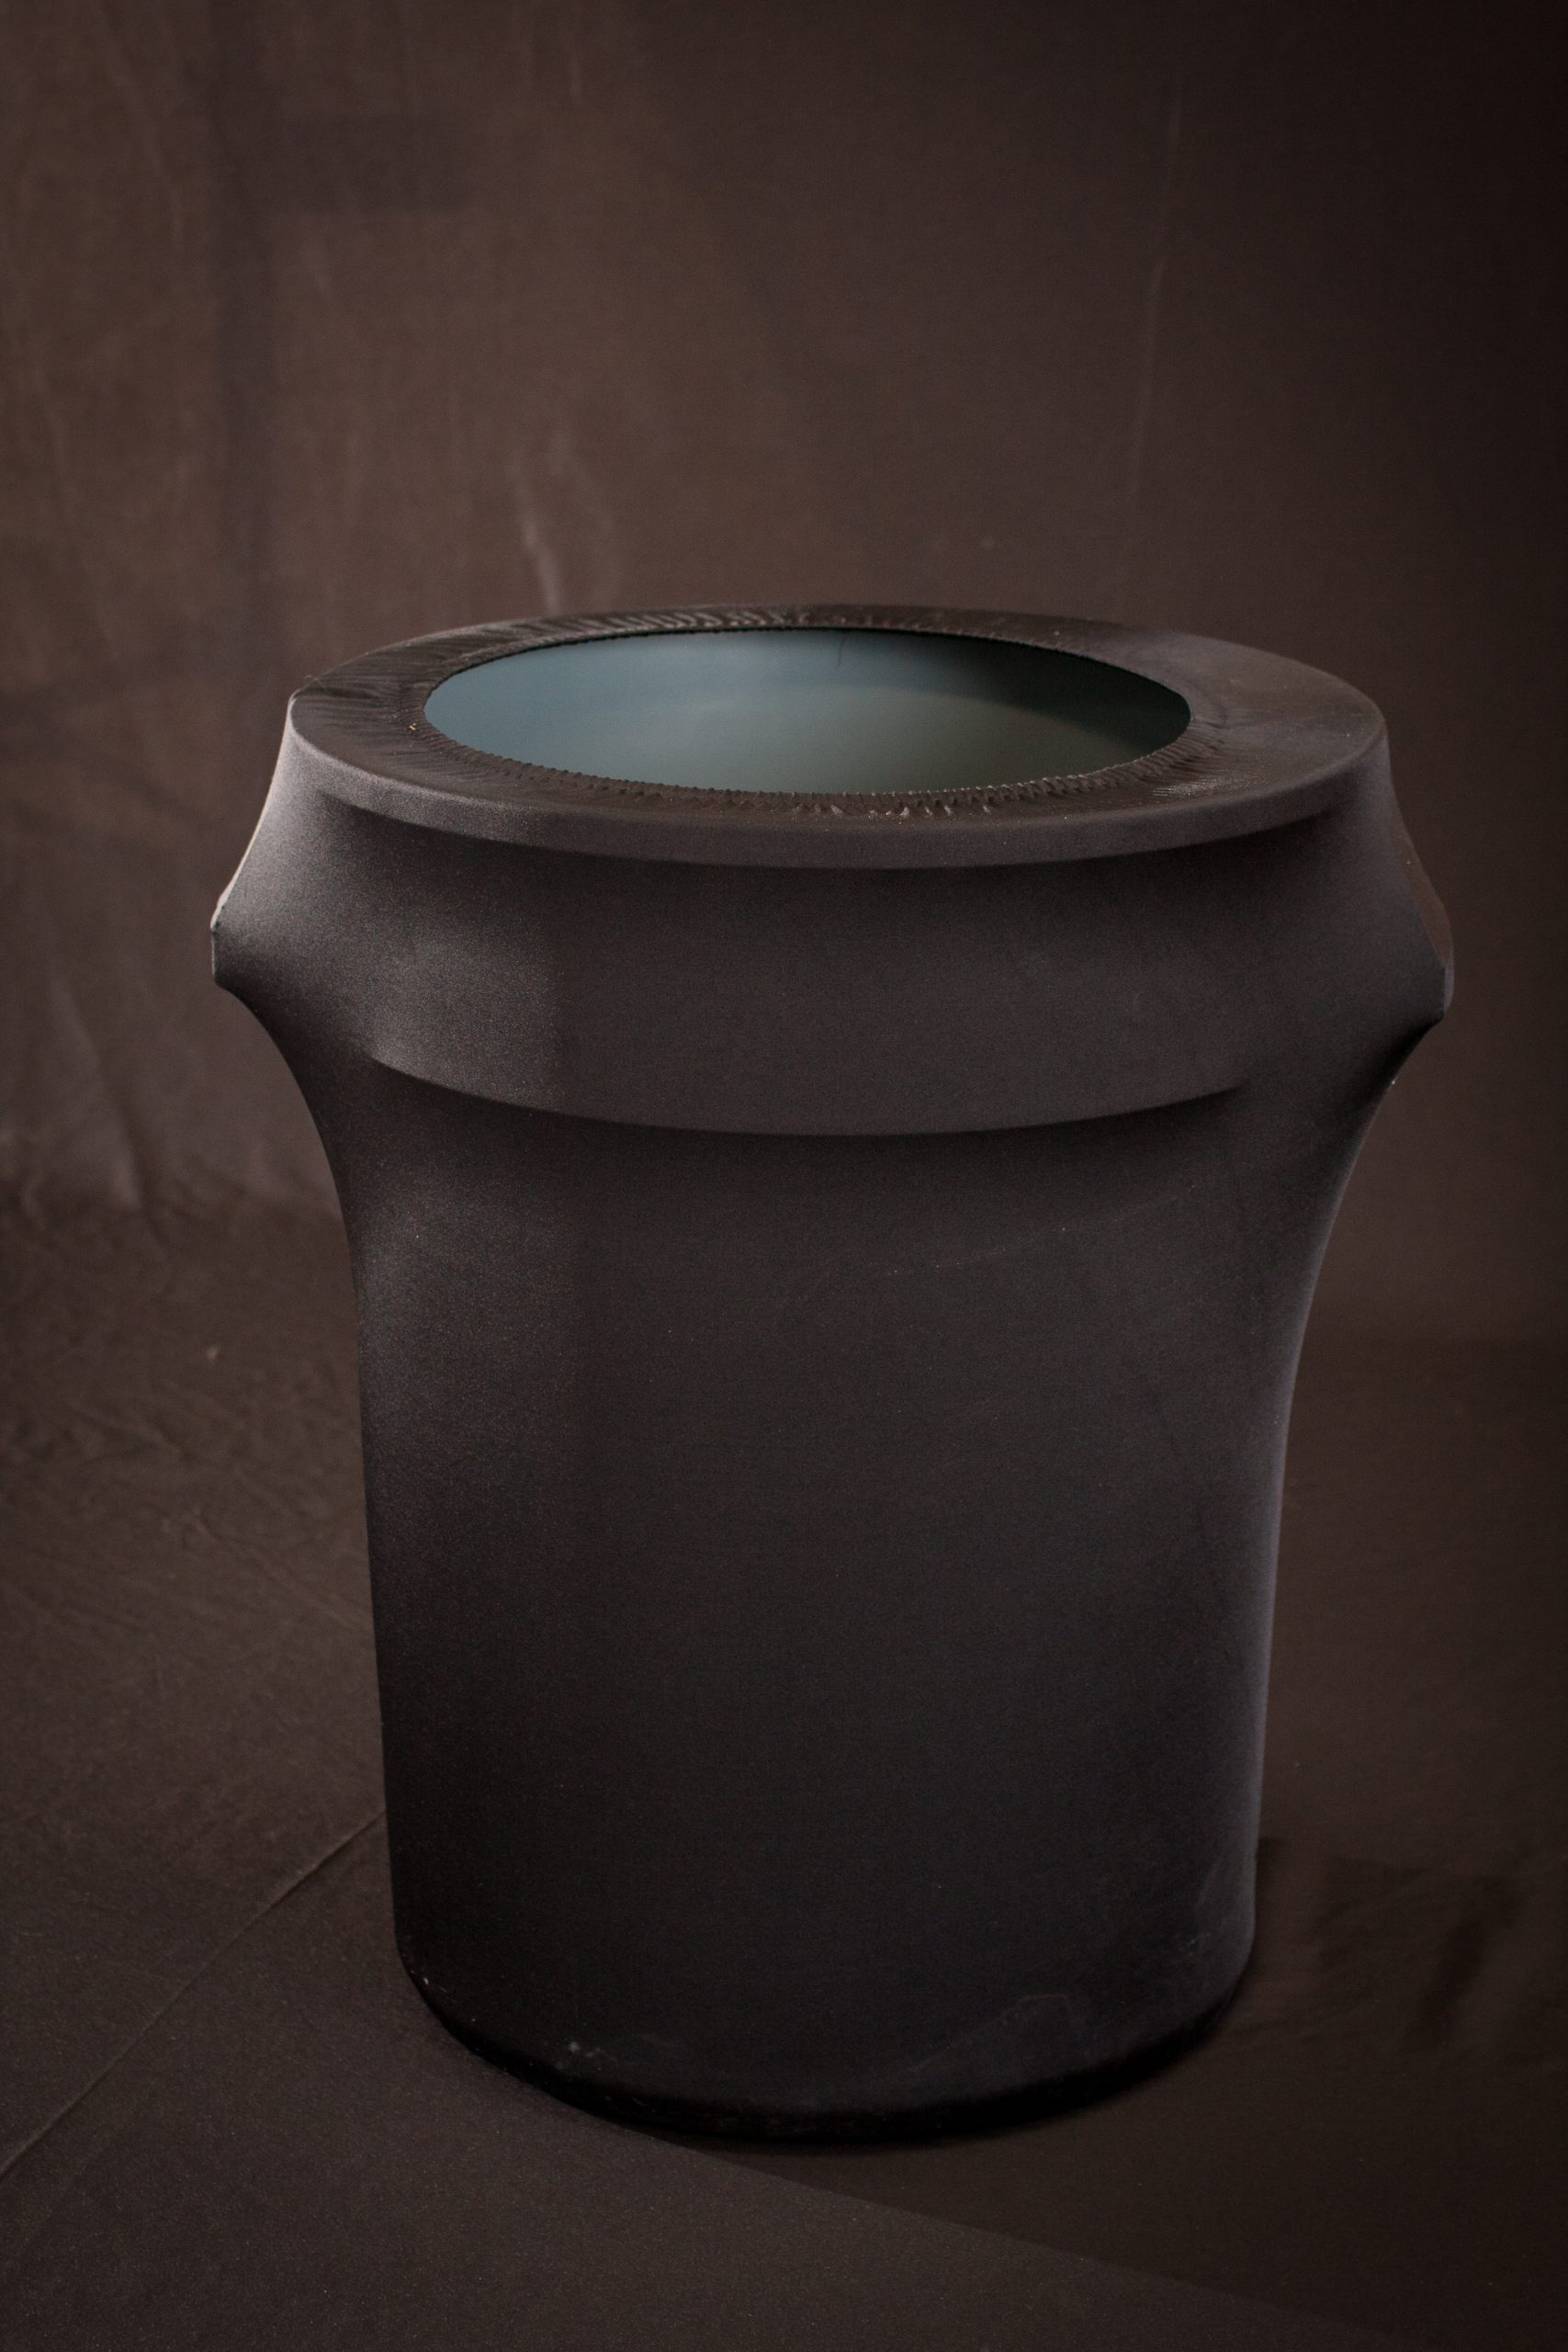 https://eventpartyrentals.com/wp-content/uploads/2022/01/MEET-TRASHCAN-33GAL-WITH-COVER-scaled.jpg